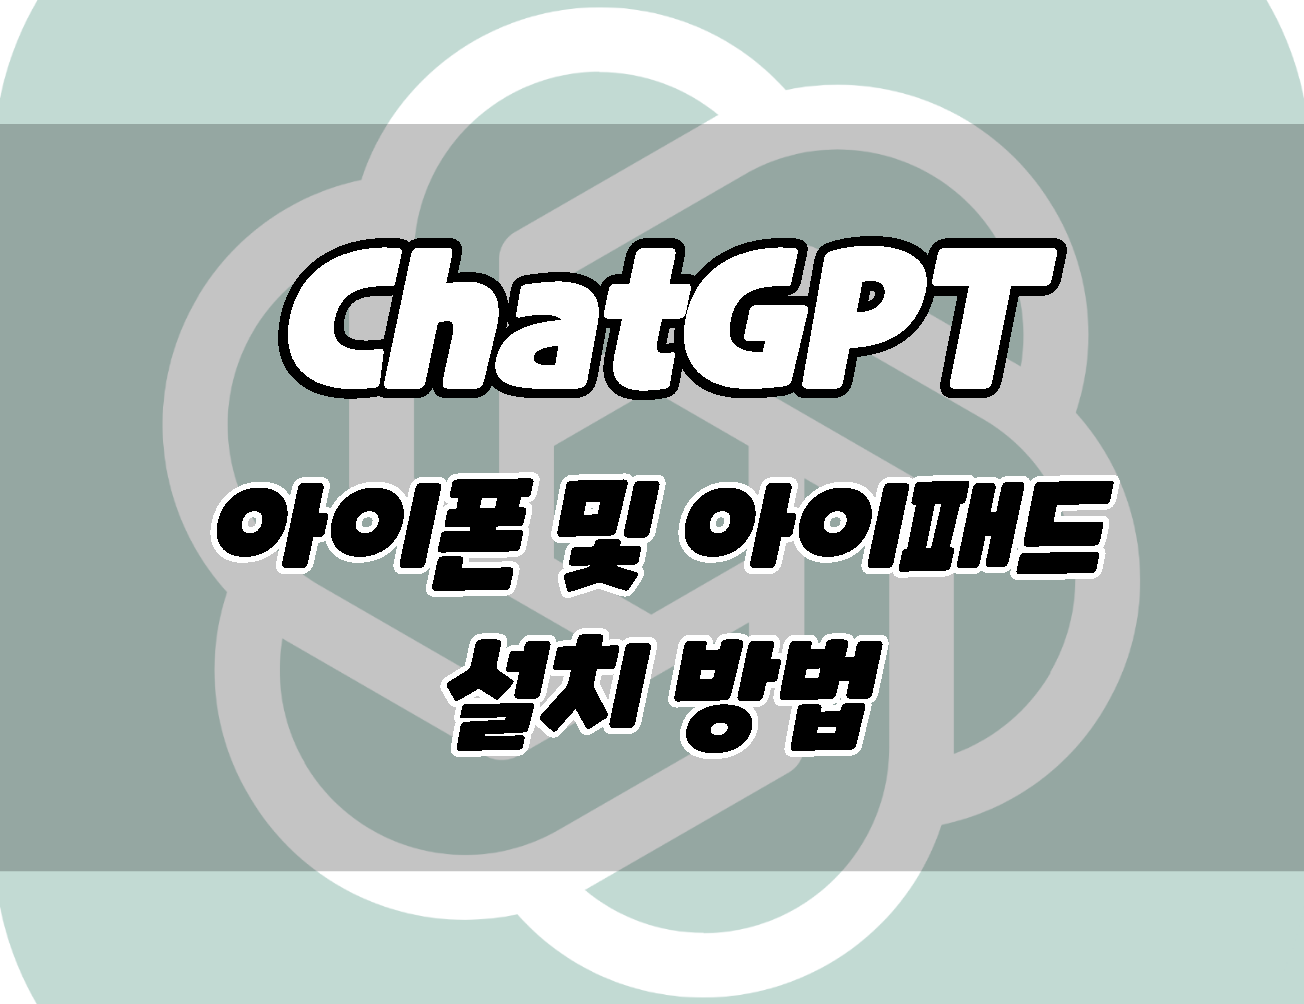 How to install ChatGPT as app on iPhone and iPad ChatGPT